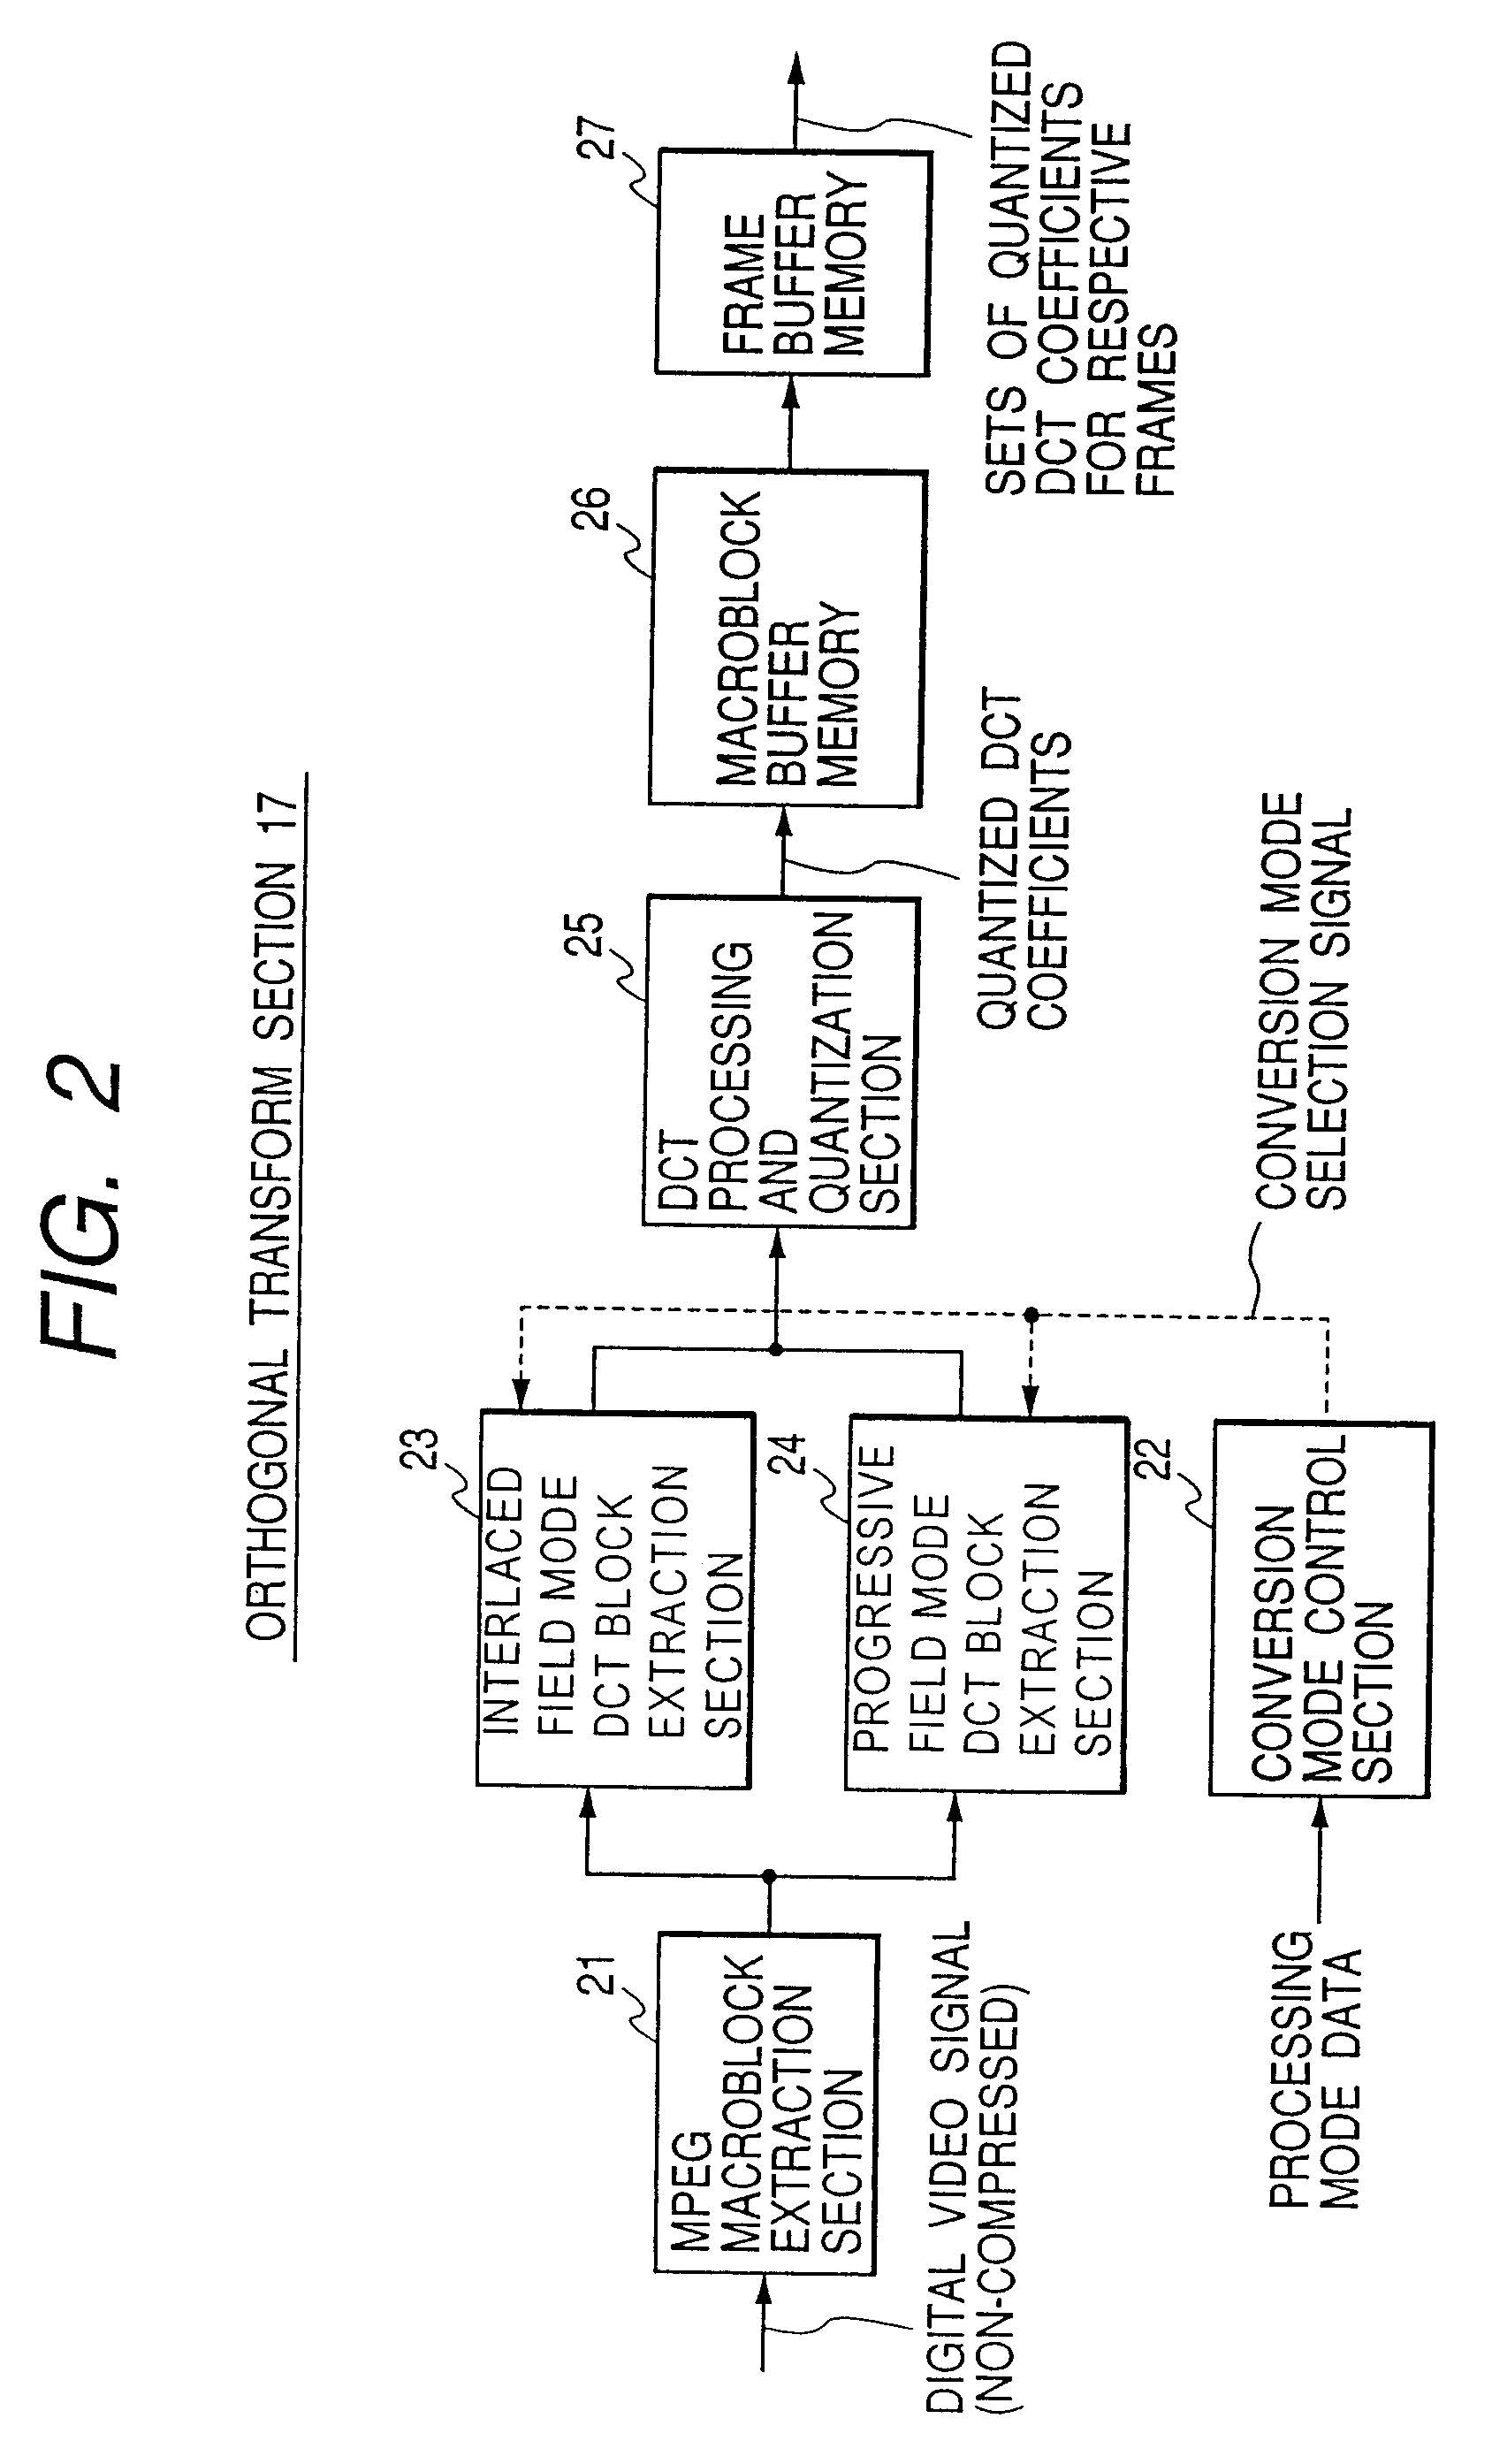 Apparatus and method for efficient conversion of DV (digital video) format encoded video data into MPEG format encoded video data by utilizing motion flag information contained in the DV data